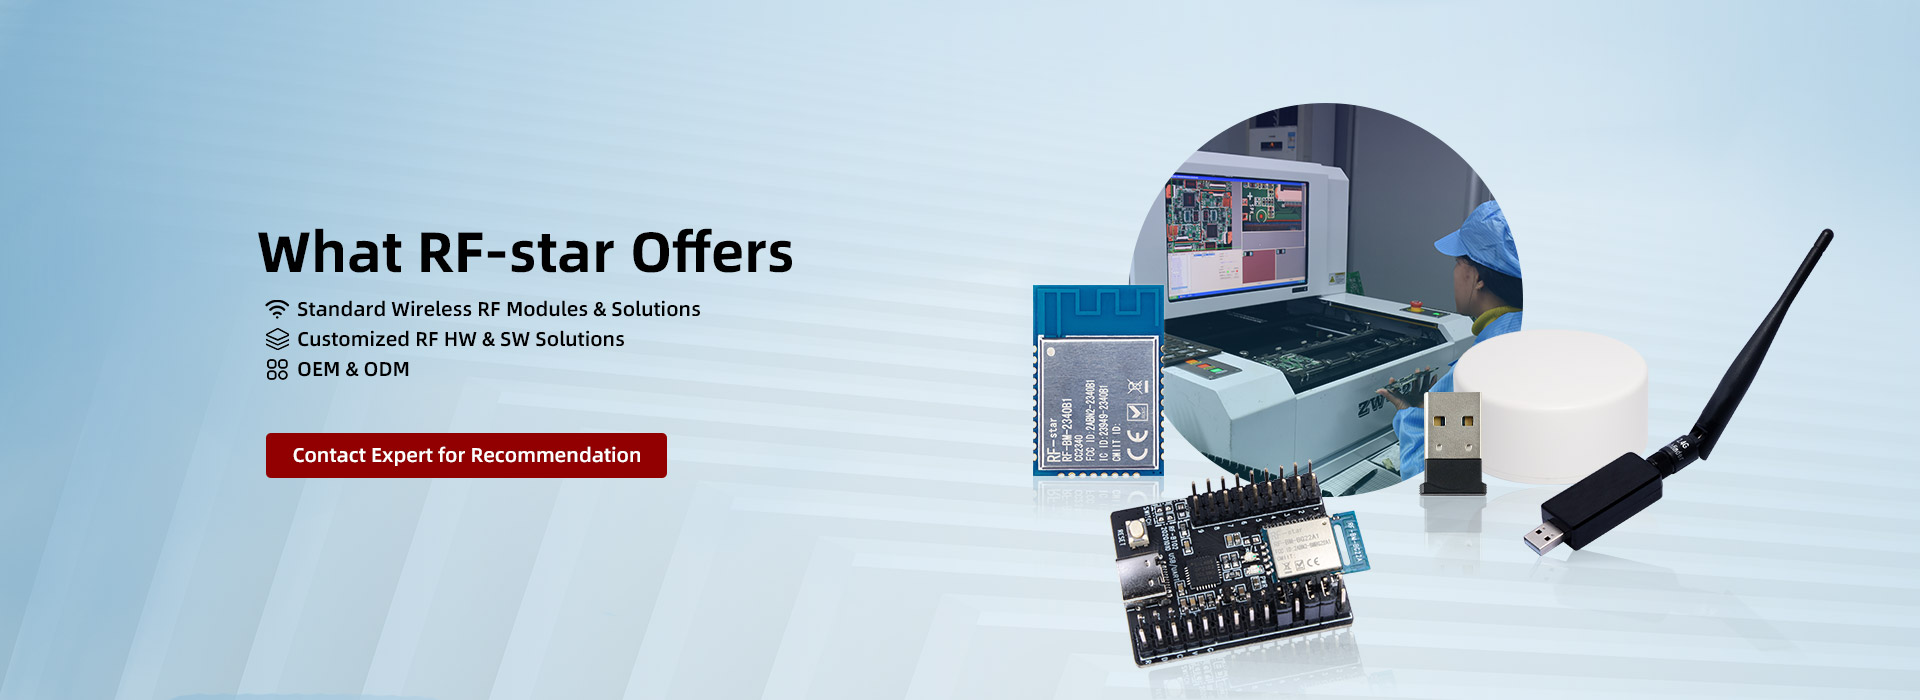 RF-star Offers Stardard Wireless RF Modules & Solutions, Customized RF HW & SW Solutions and OEM & ODM. 